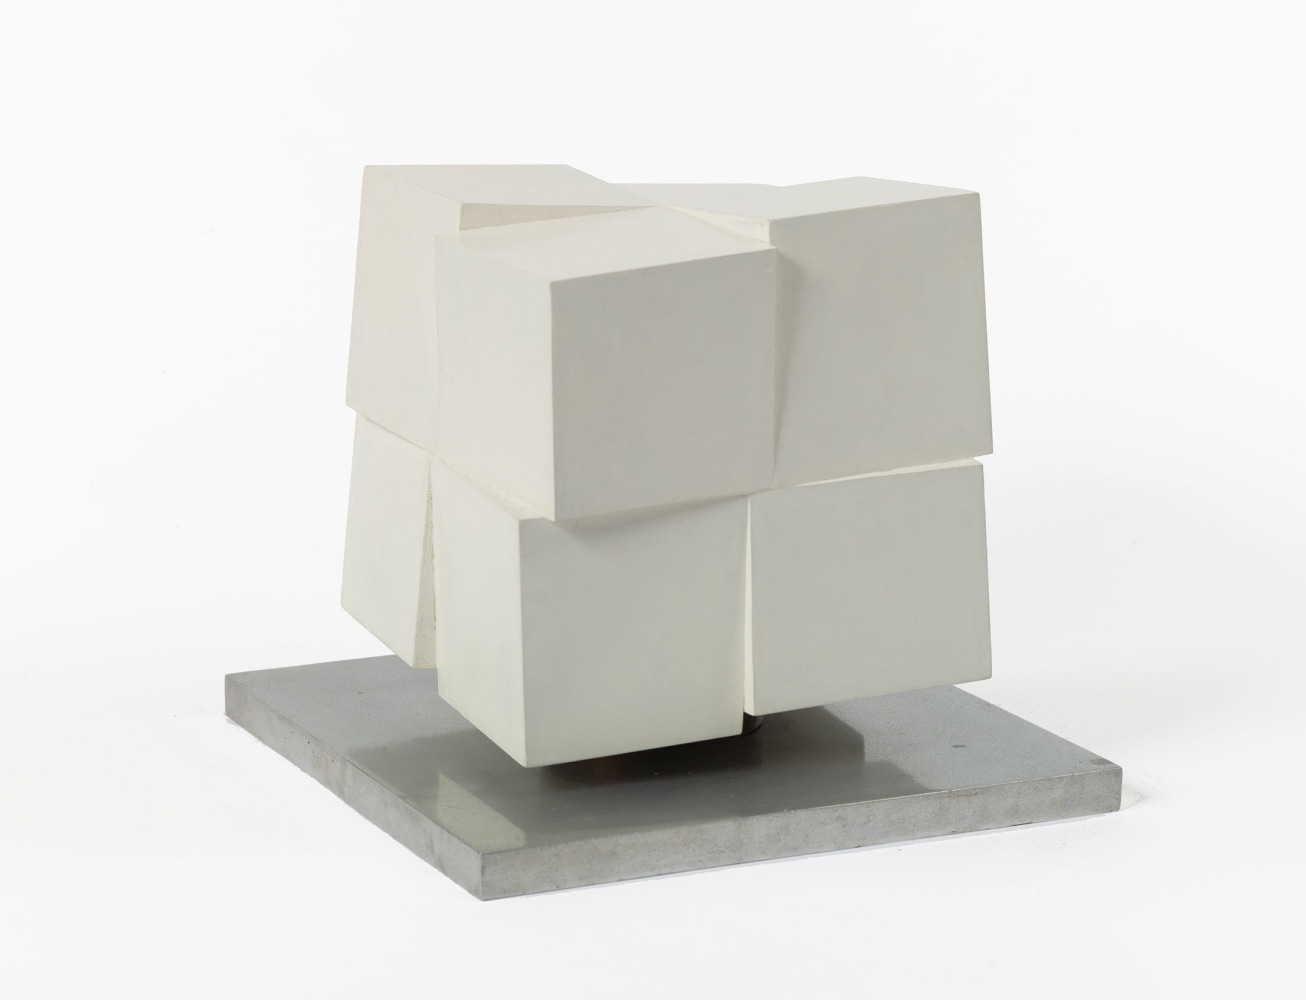 Jeremy Moon
Split Cube, 1962
Oil on wood with aluminum base
8 5/8 x 8 5/8 x 8 5/8 inches
(22 x 22 x 22 cm)